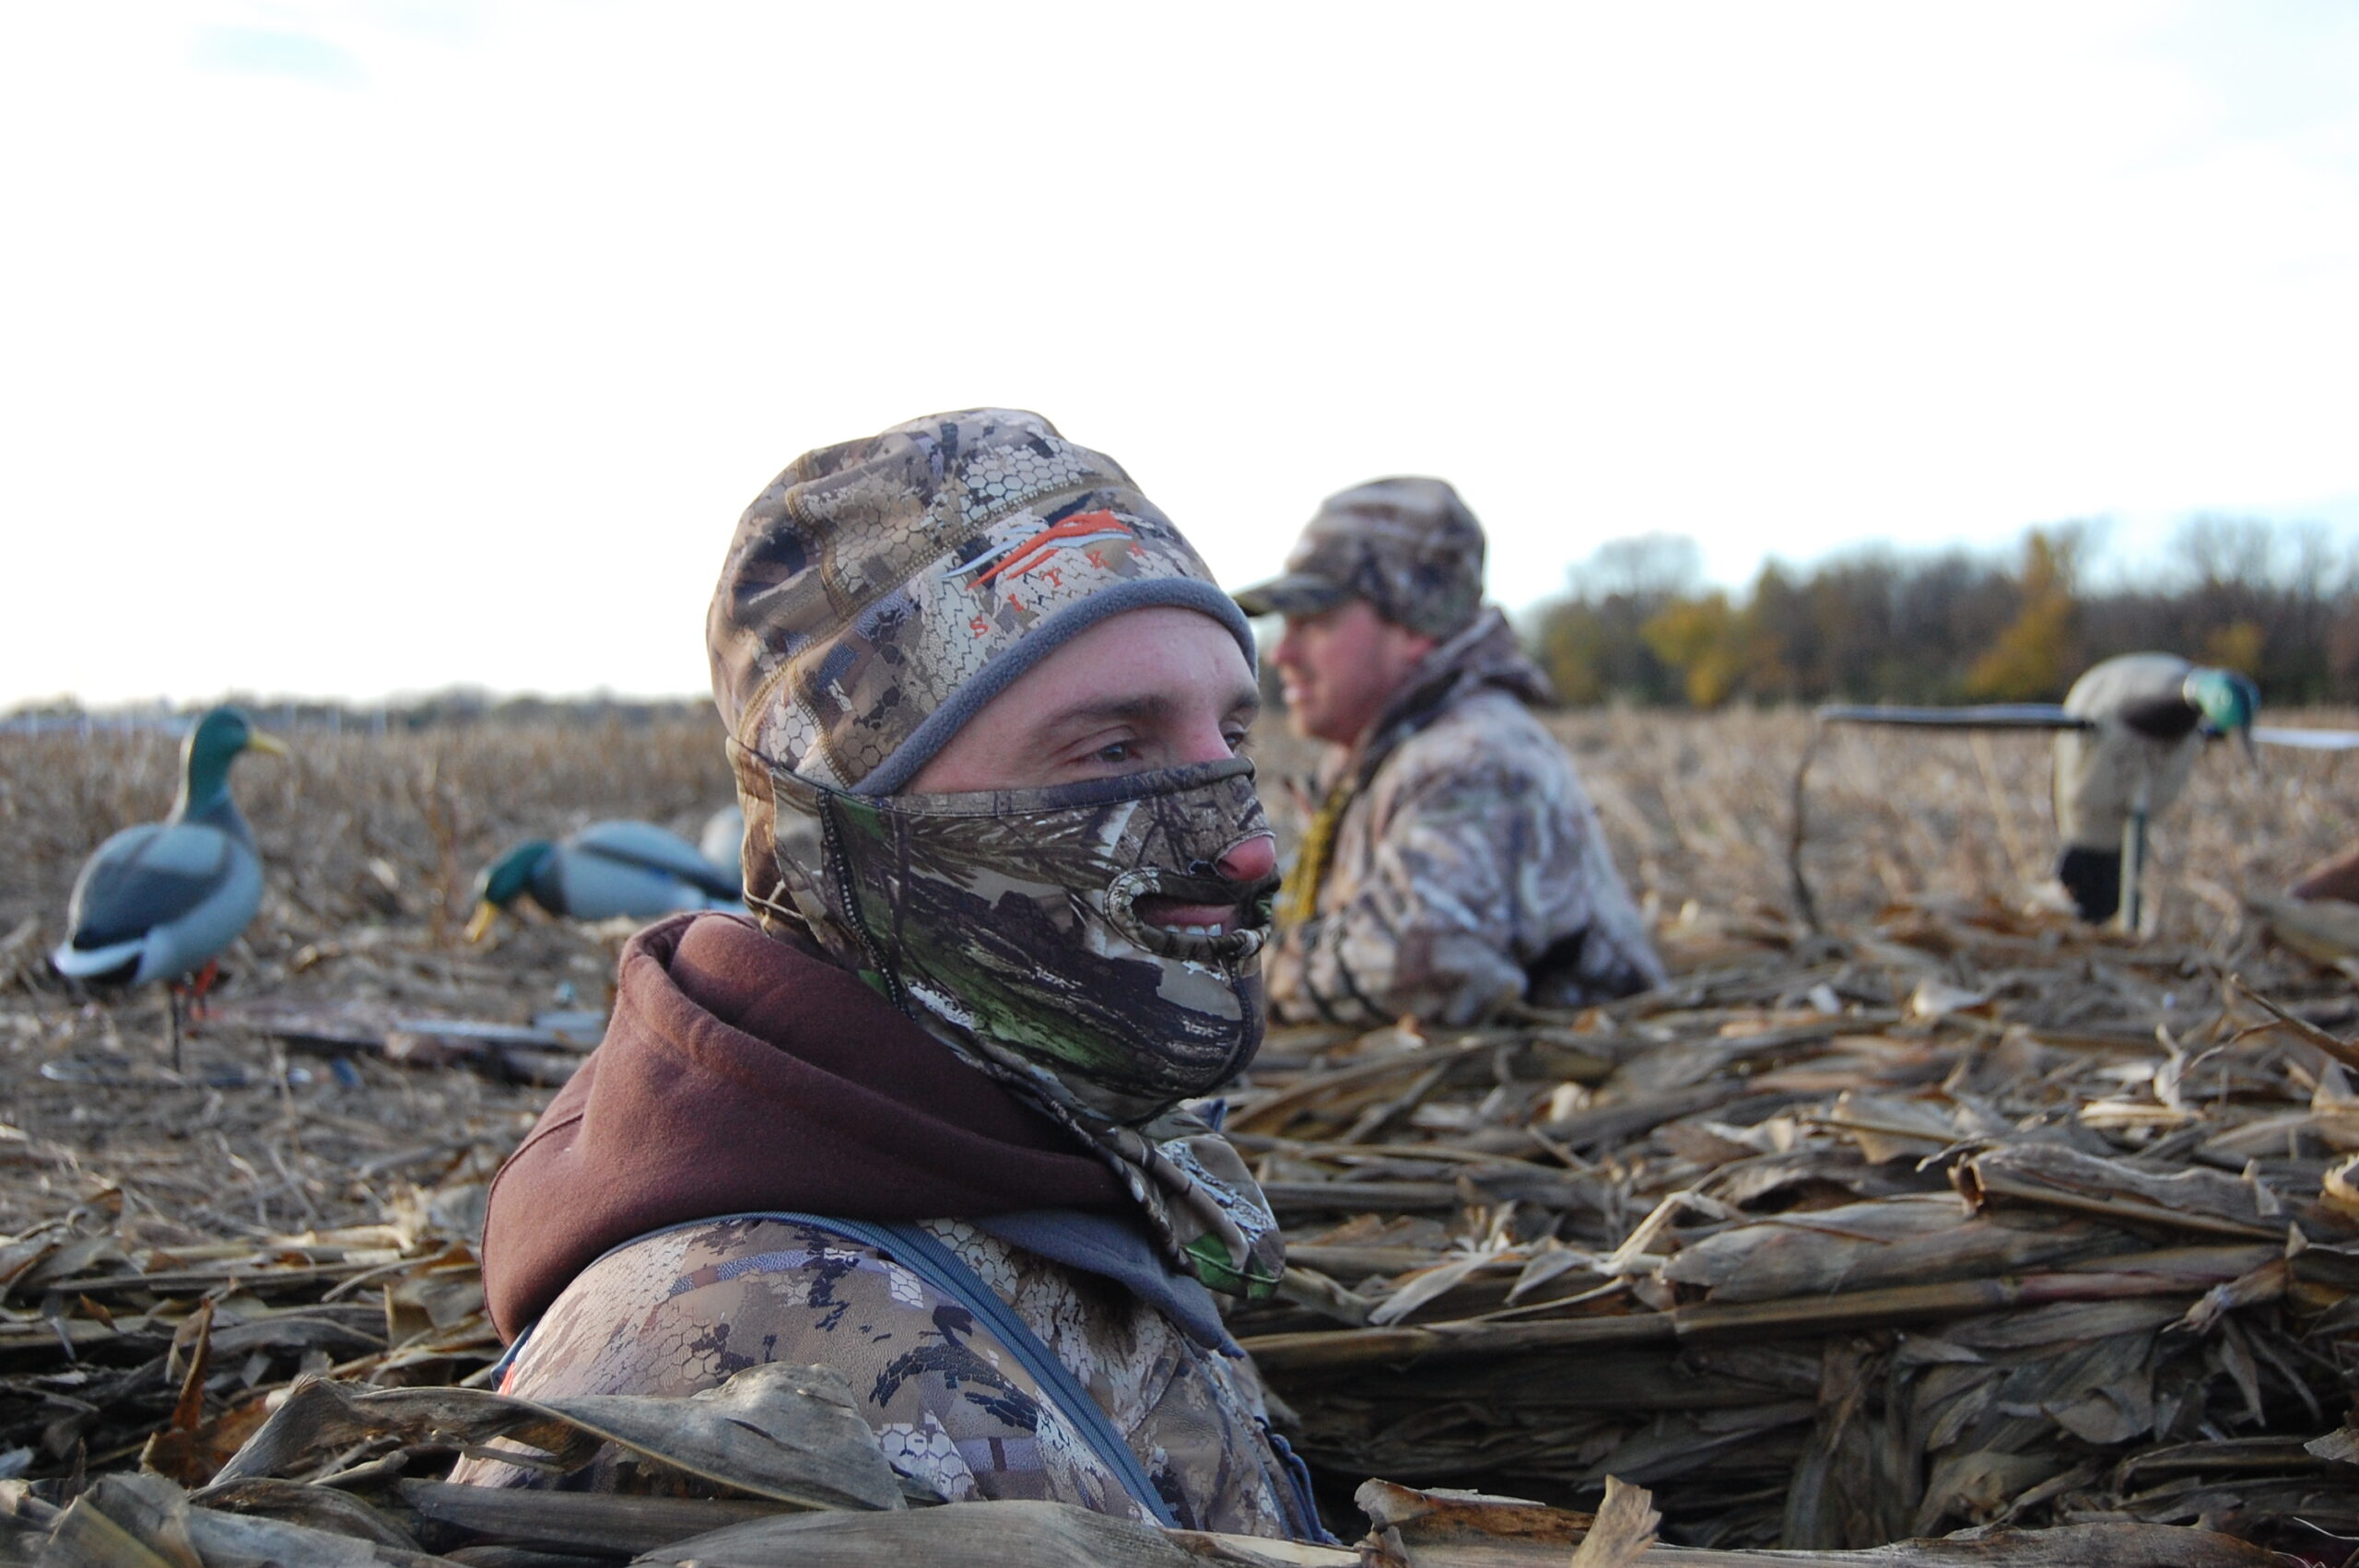 Ducks are adapting to hunting pressure, and it's making hunting more difficult.